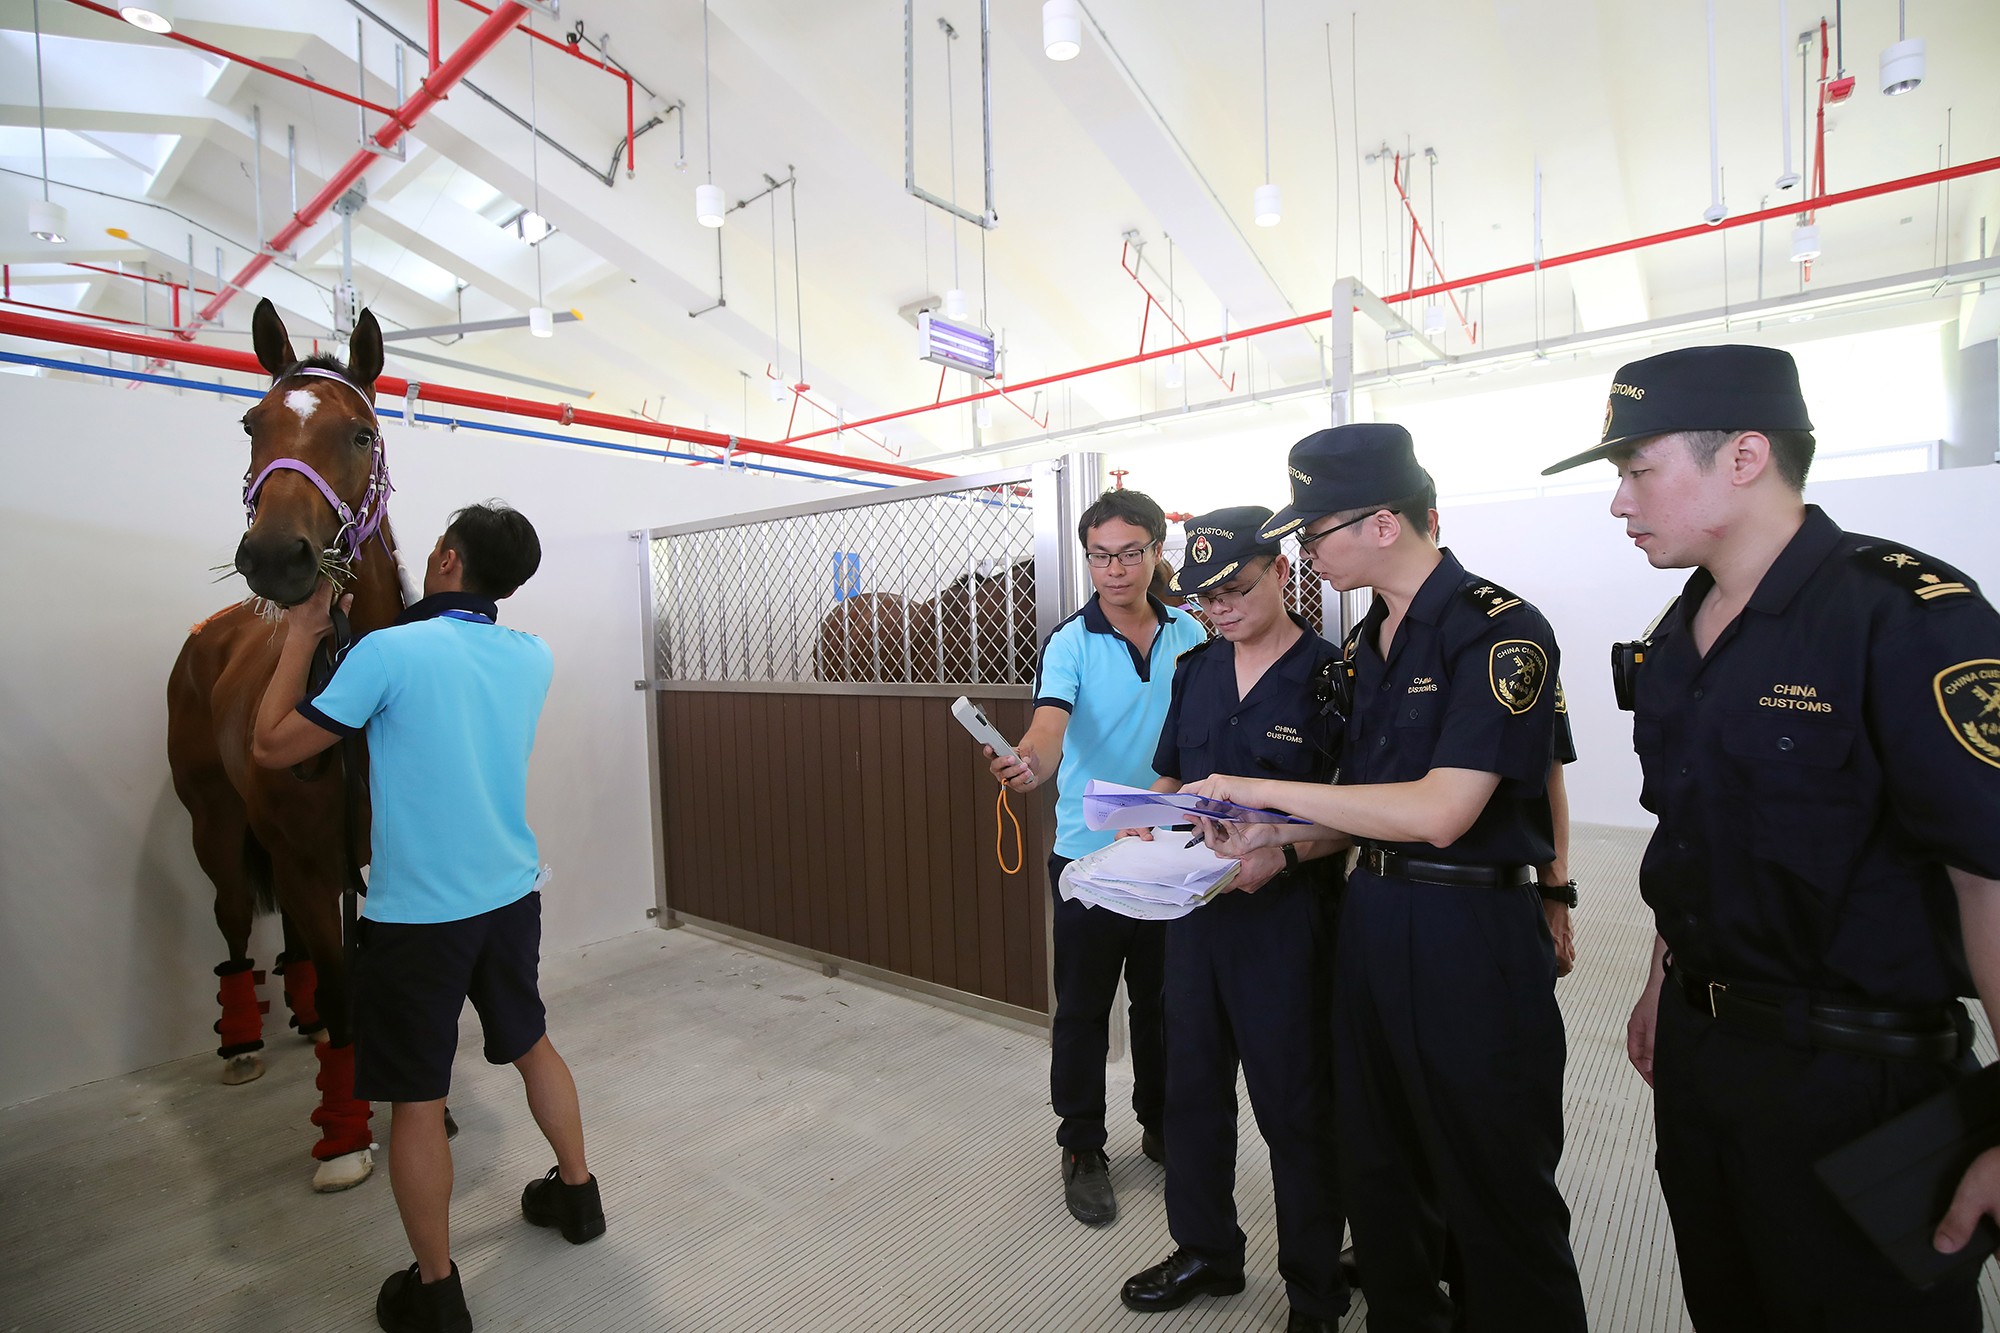 A horse gets inspected by quarantine officials at Conghua. Photo: HKJC